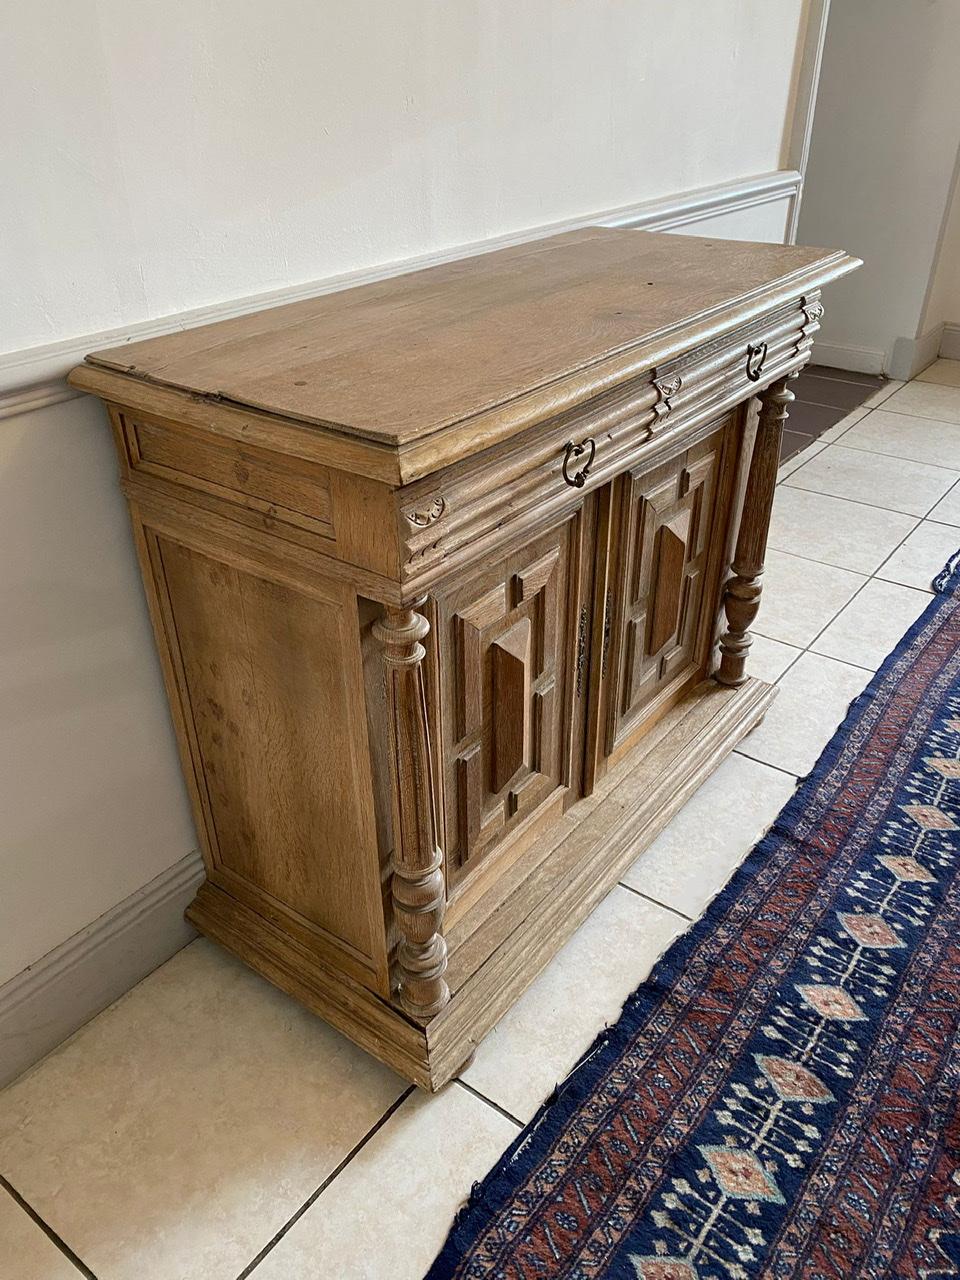 French Renaissance Revival Sideboard Henri ii Style 19th Century For Sale